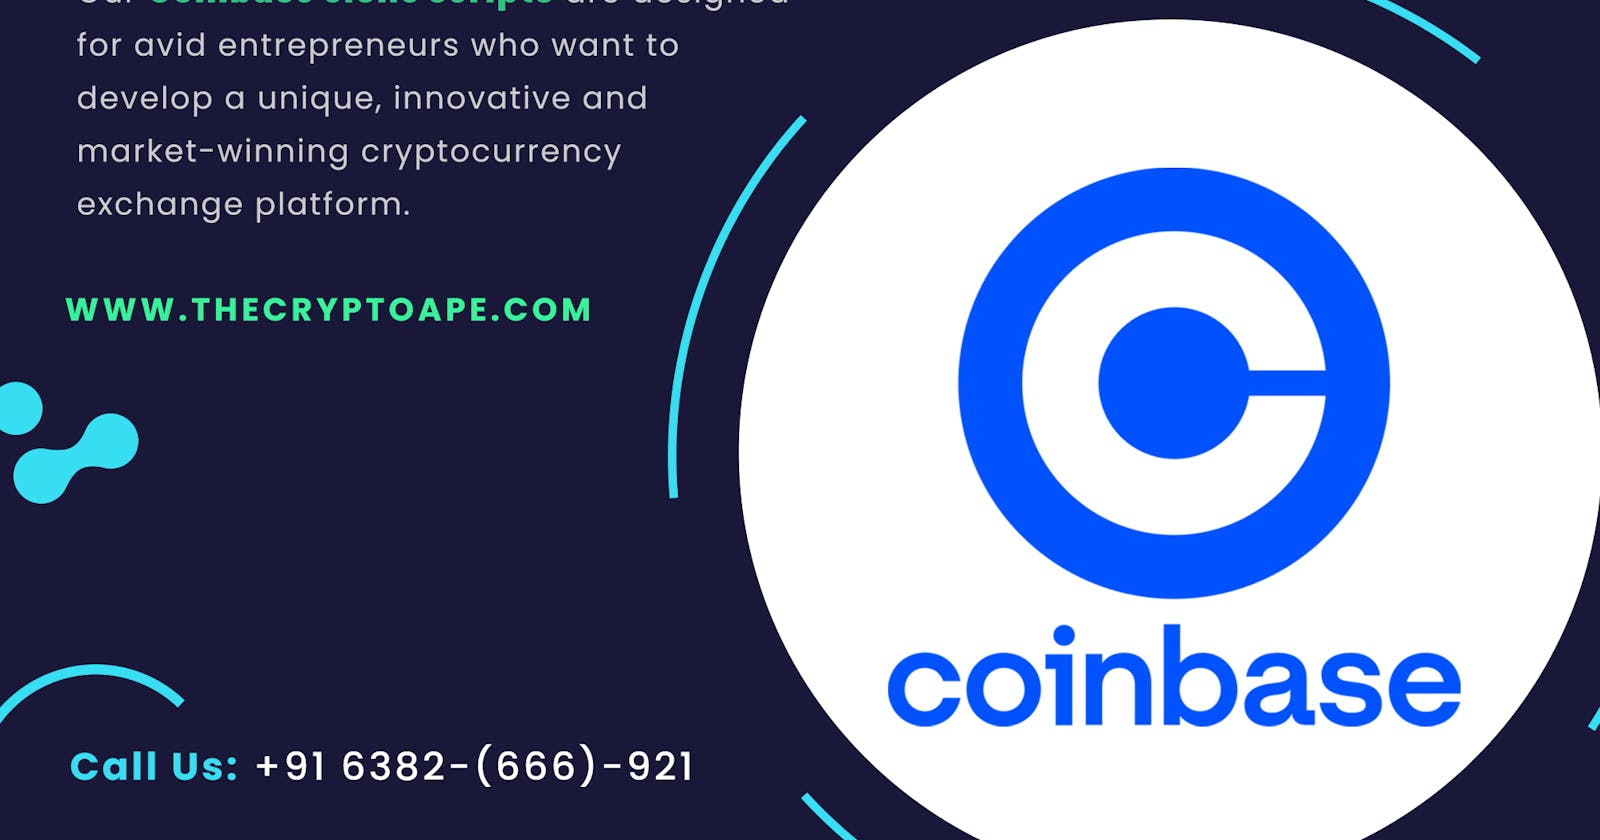 We provide robust scripts to replicate Coinbase exchange